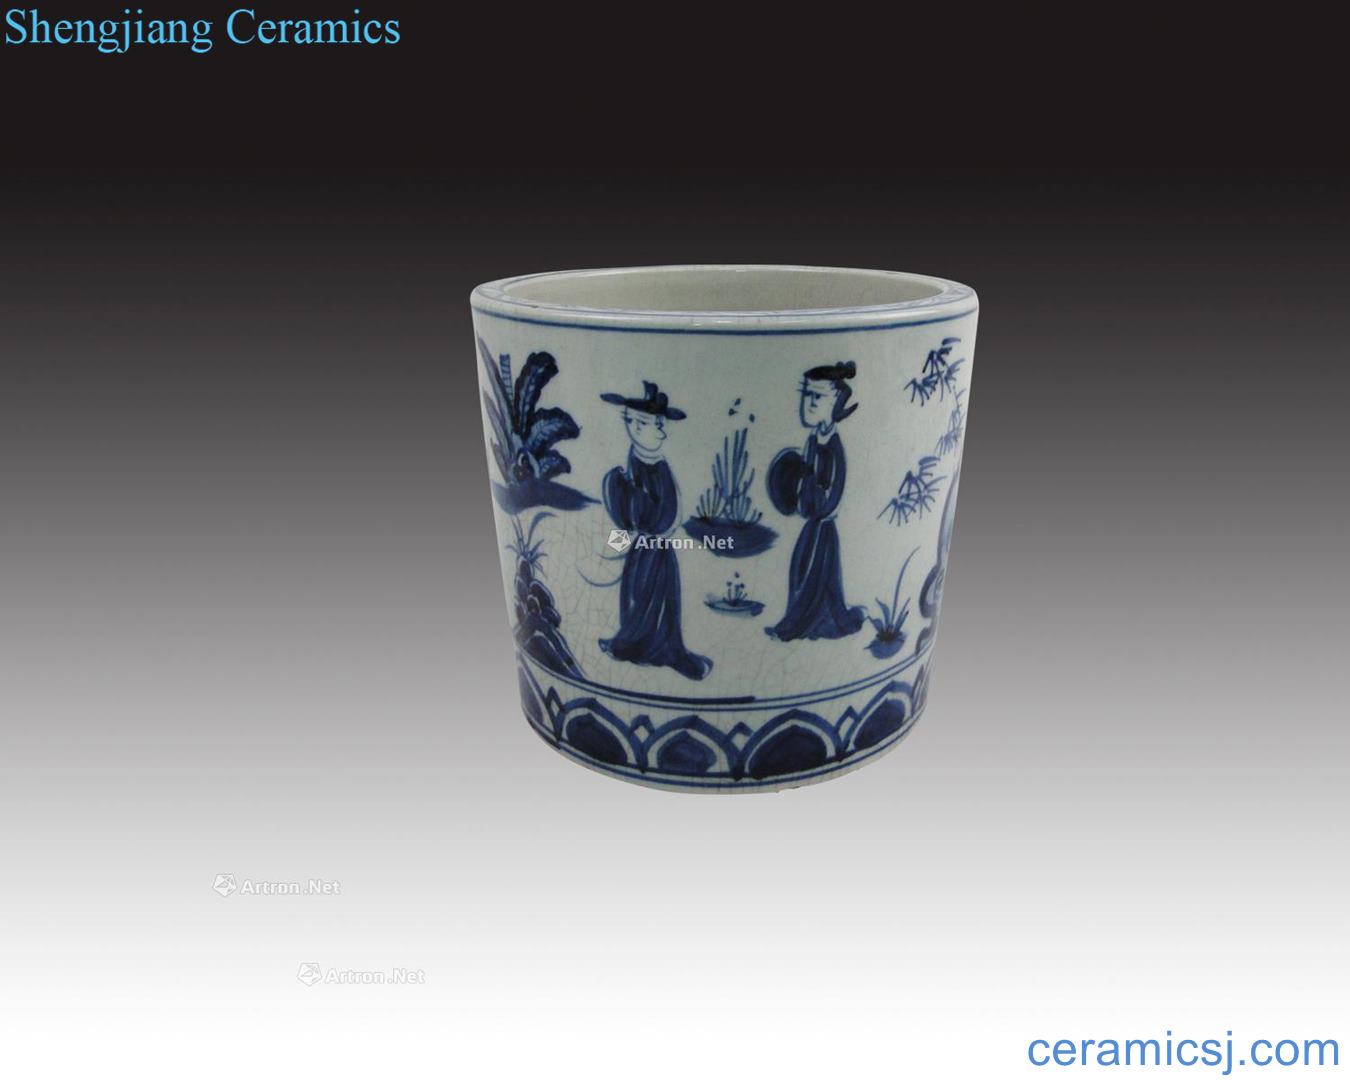 In the Ming dynasty "daming Wan Linian" character tattoo pen container